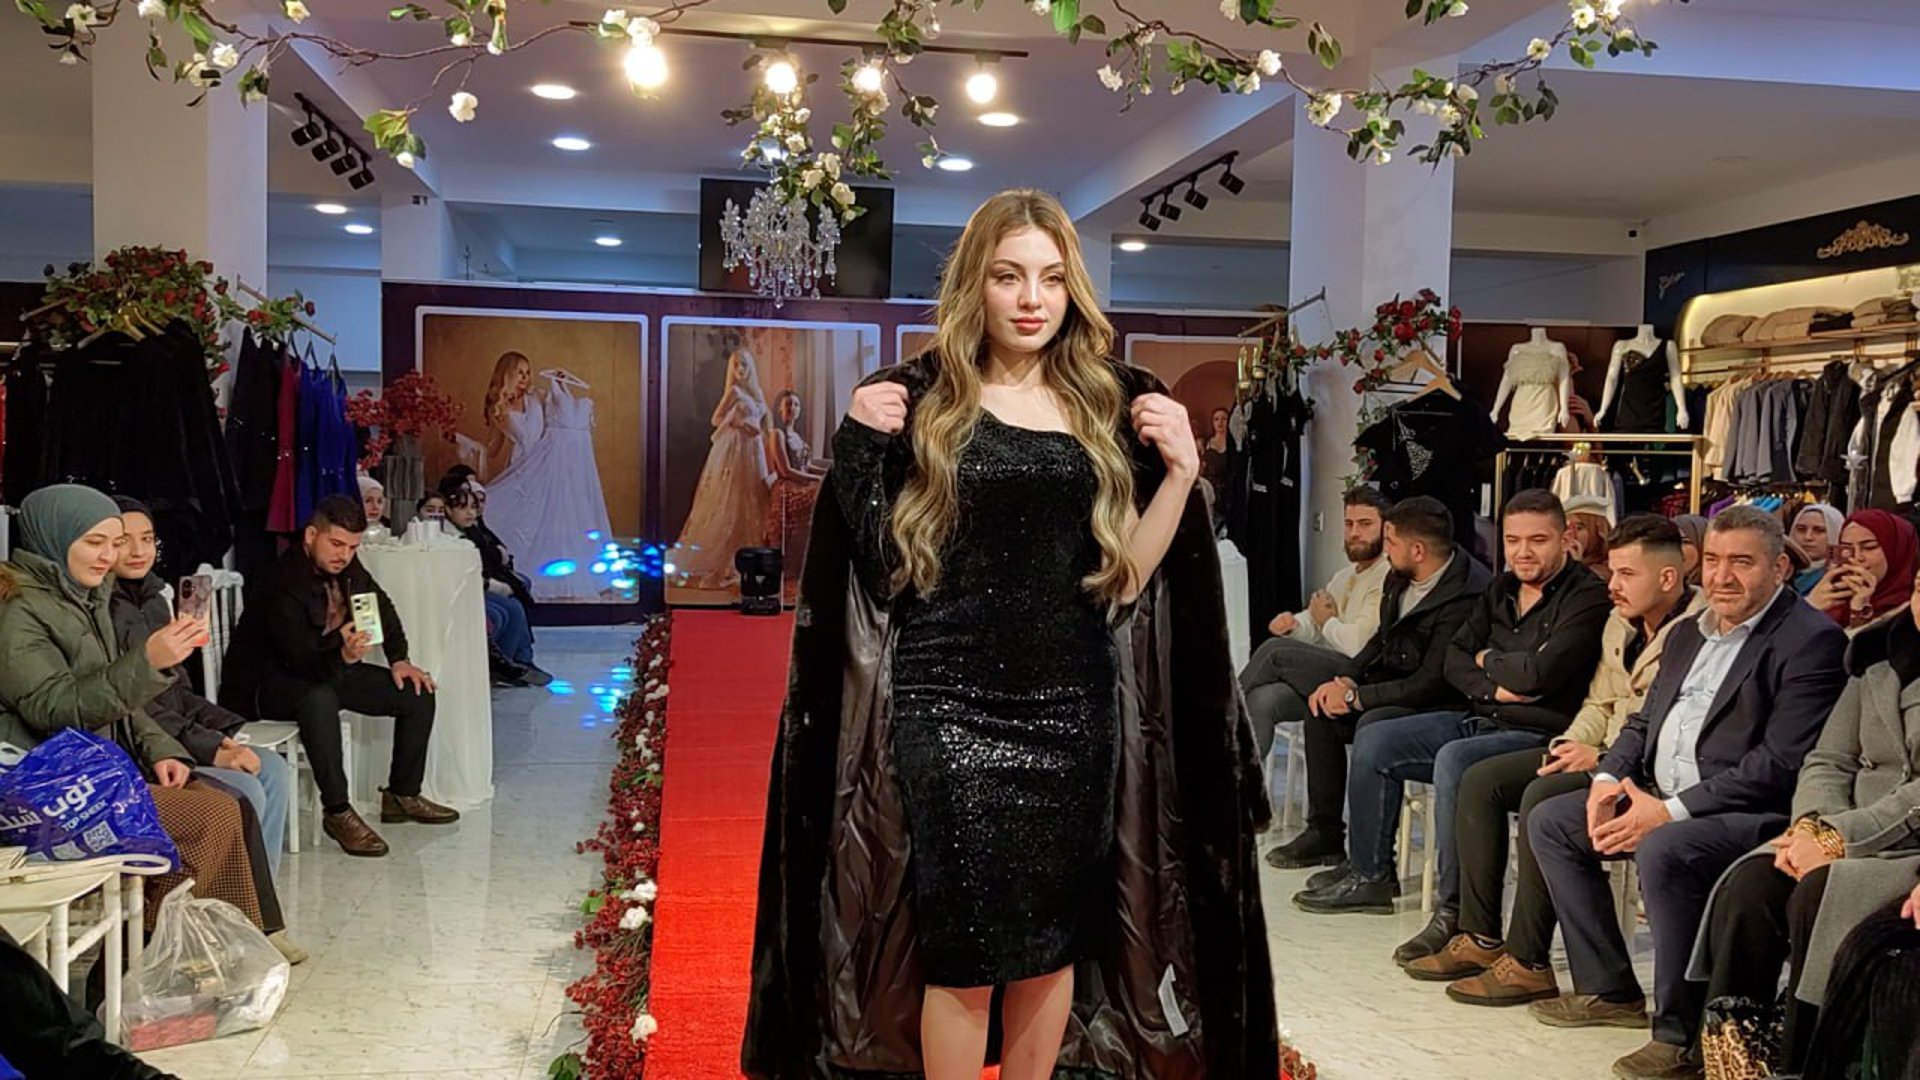 Video Mosul welcomes its first fashion house by designer Hind AlObaidi